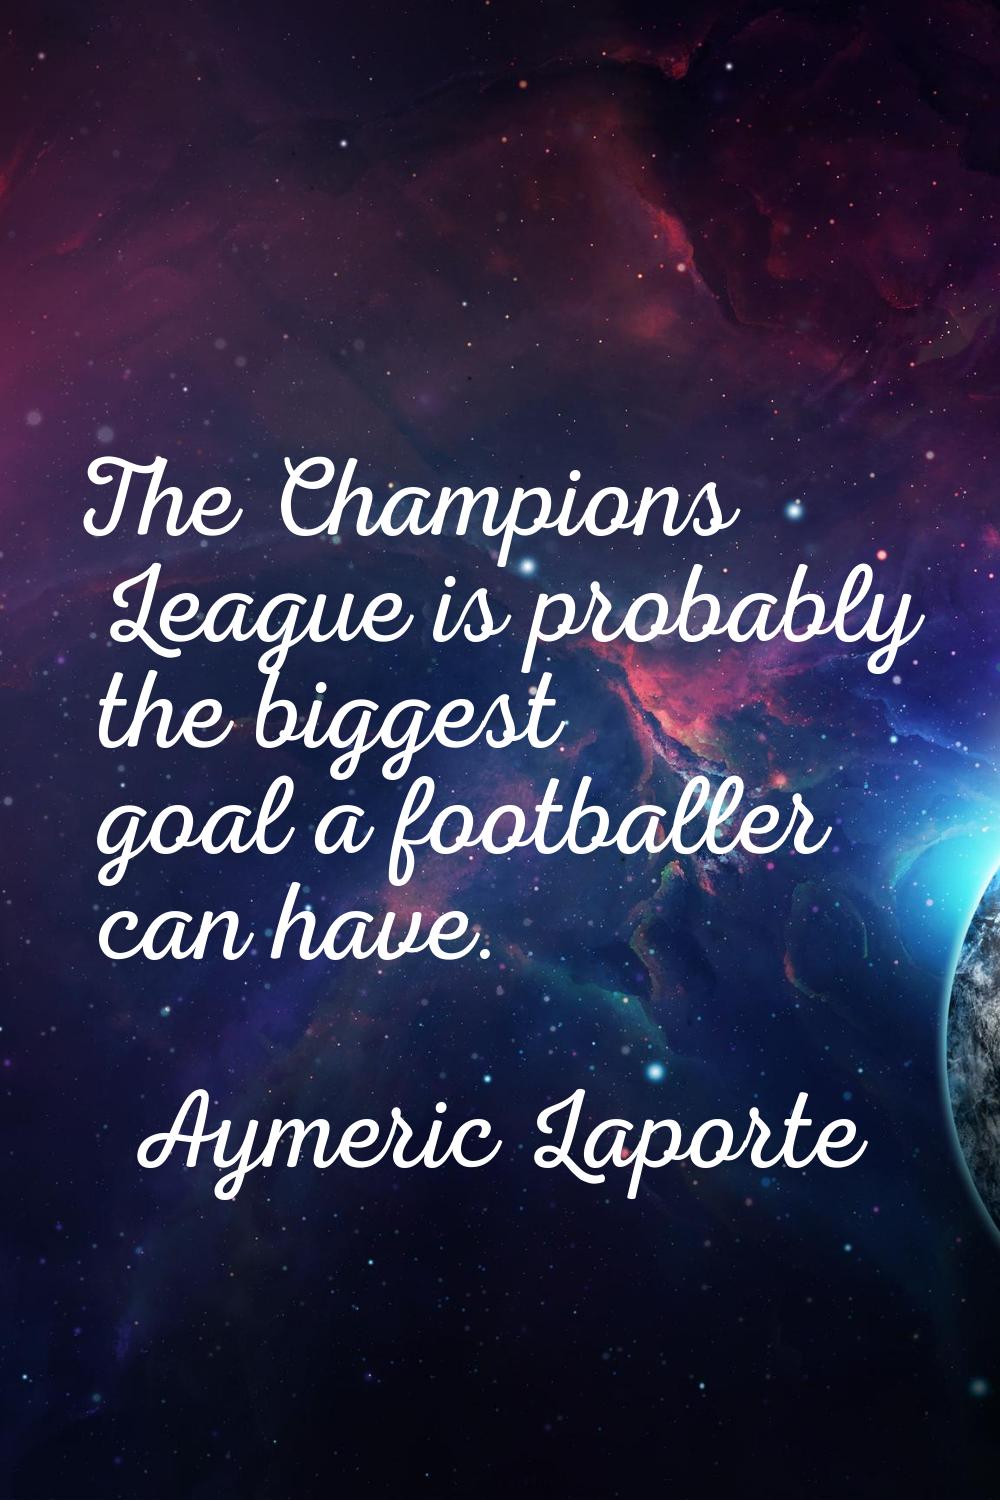 The Champions League is probably the biggest goal a footballer can have.